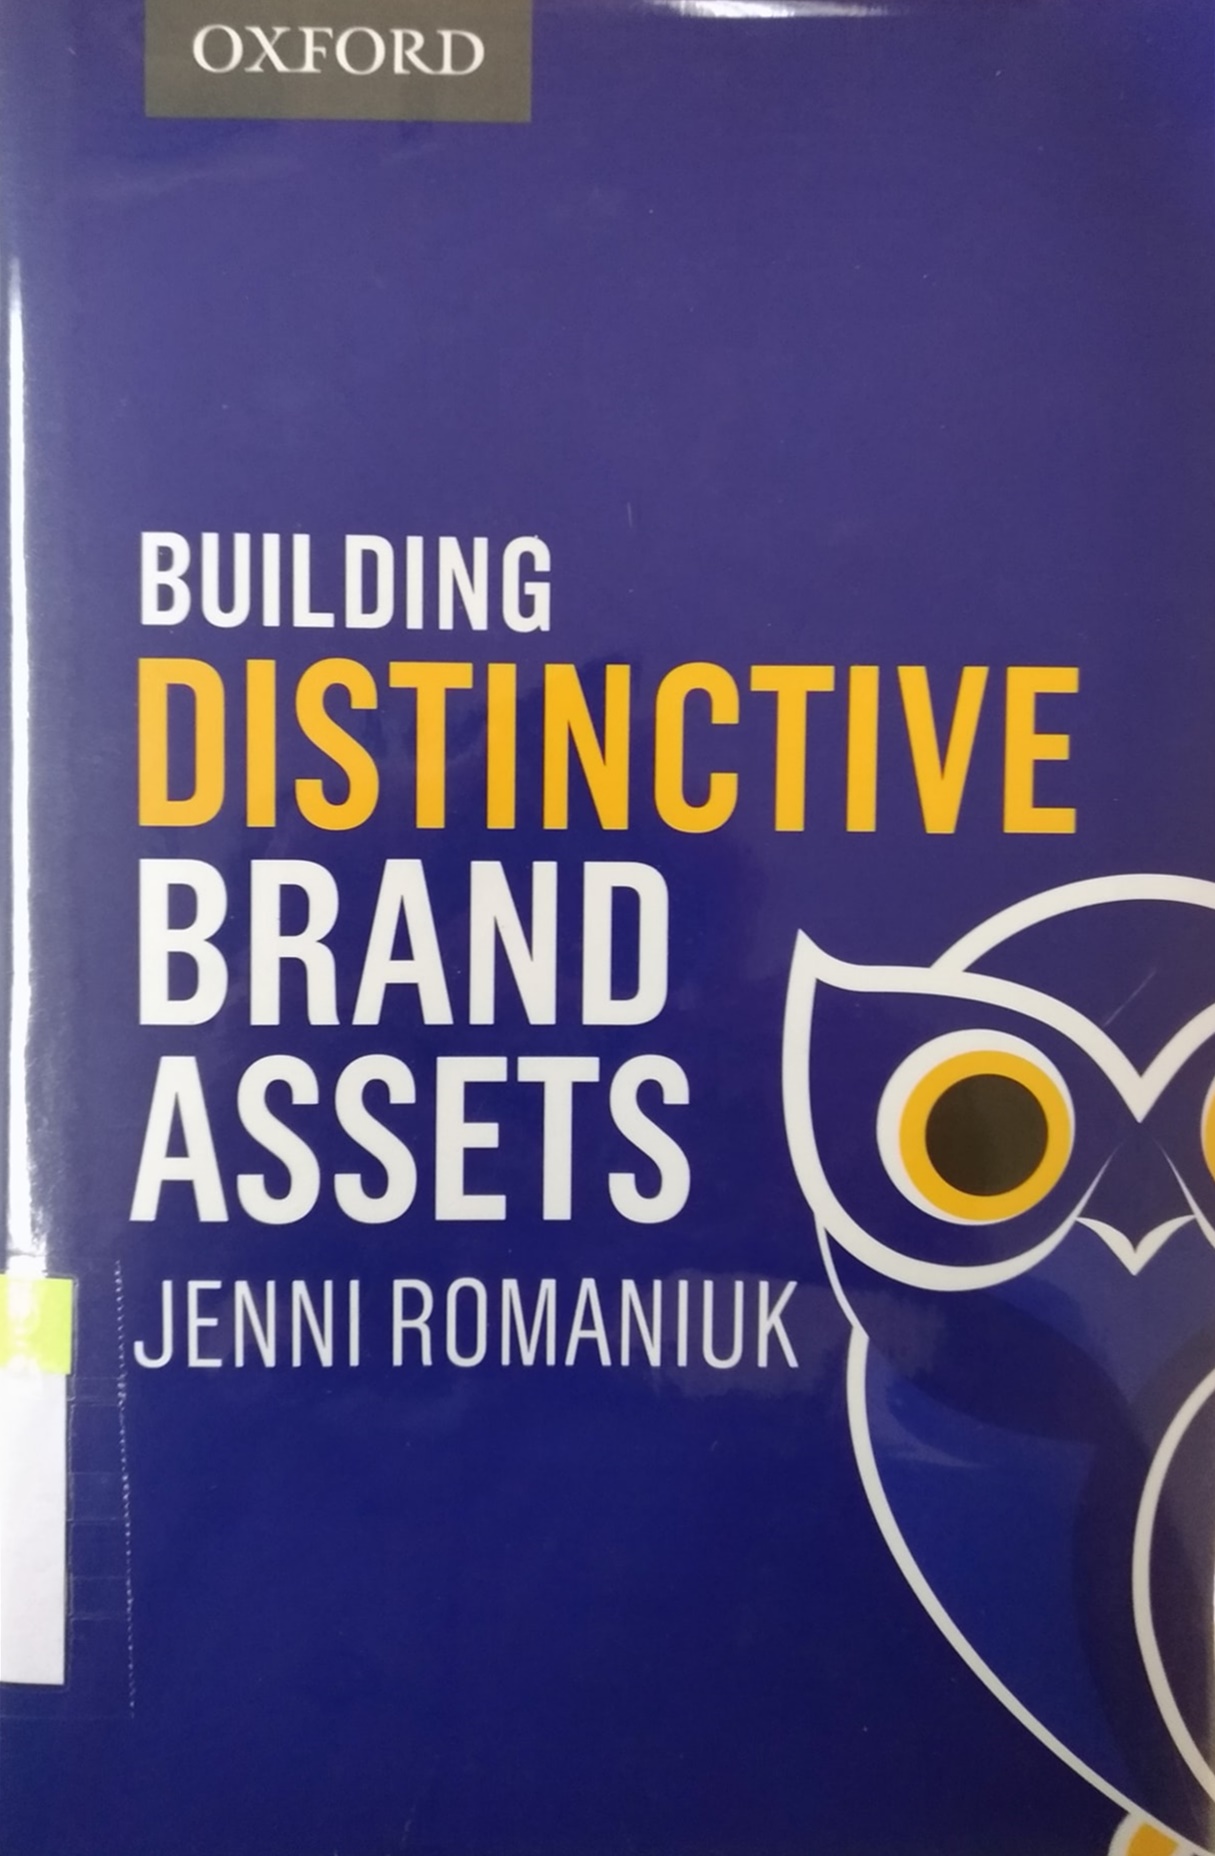 Cover of Building distinctive brand assets